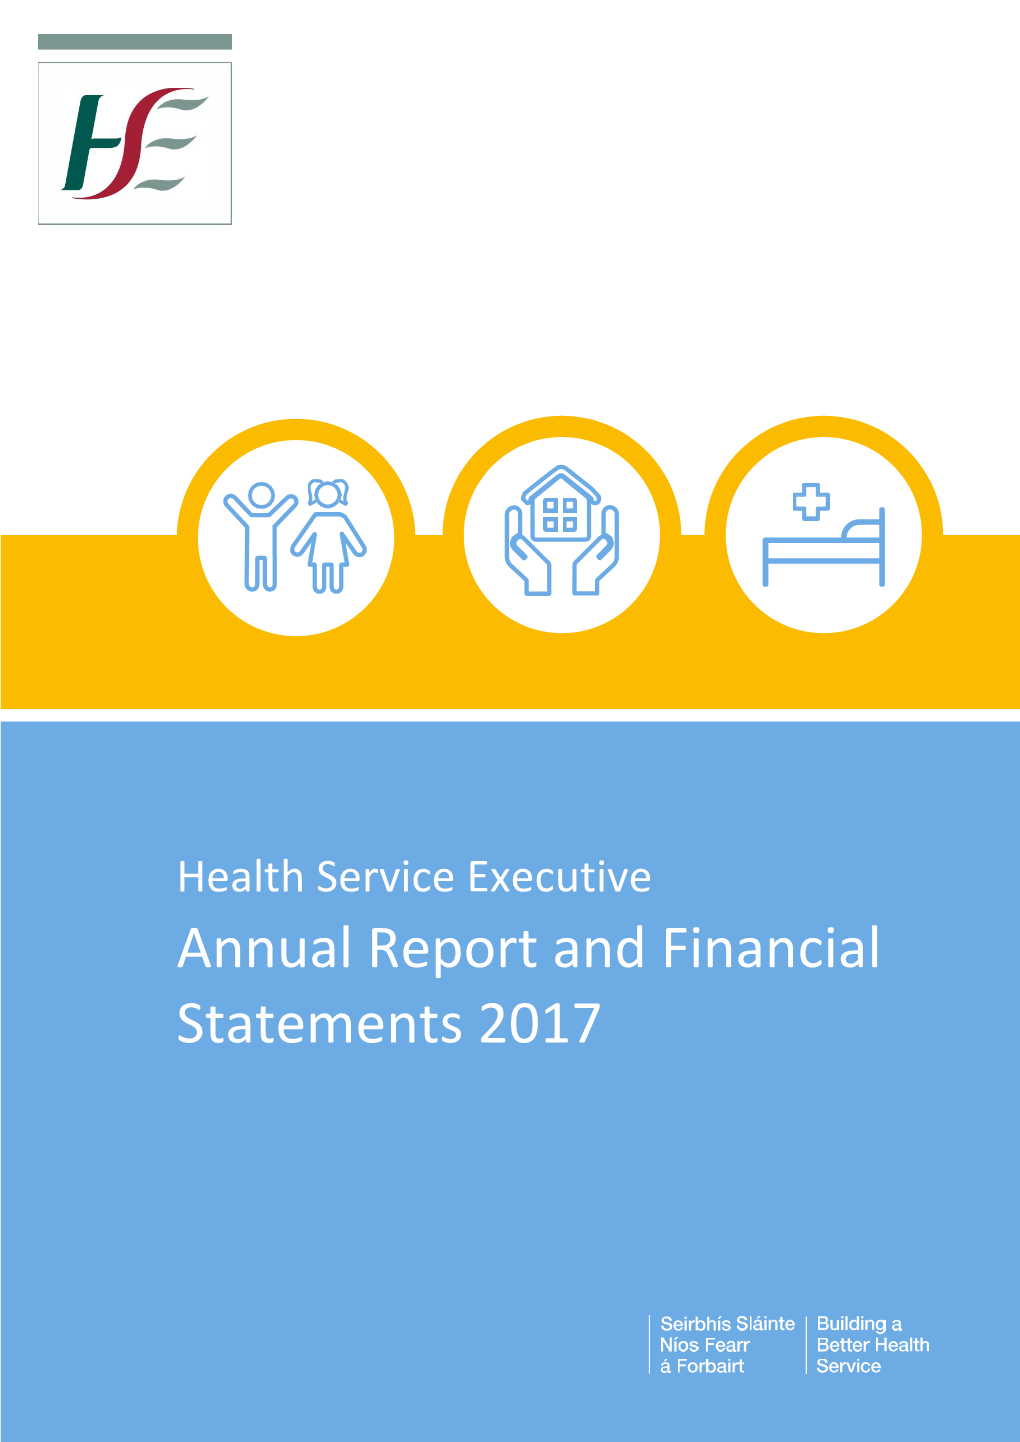 HSE Annual Report and Financial Statements 2017